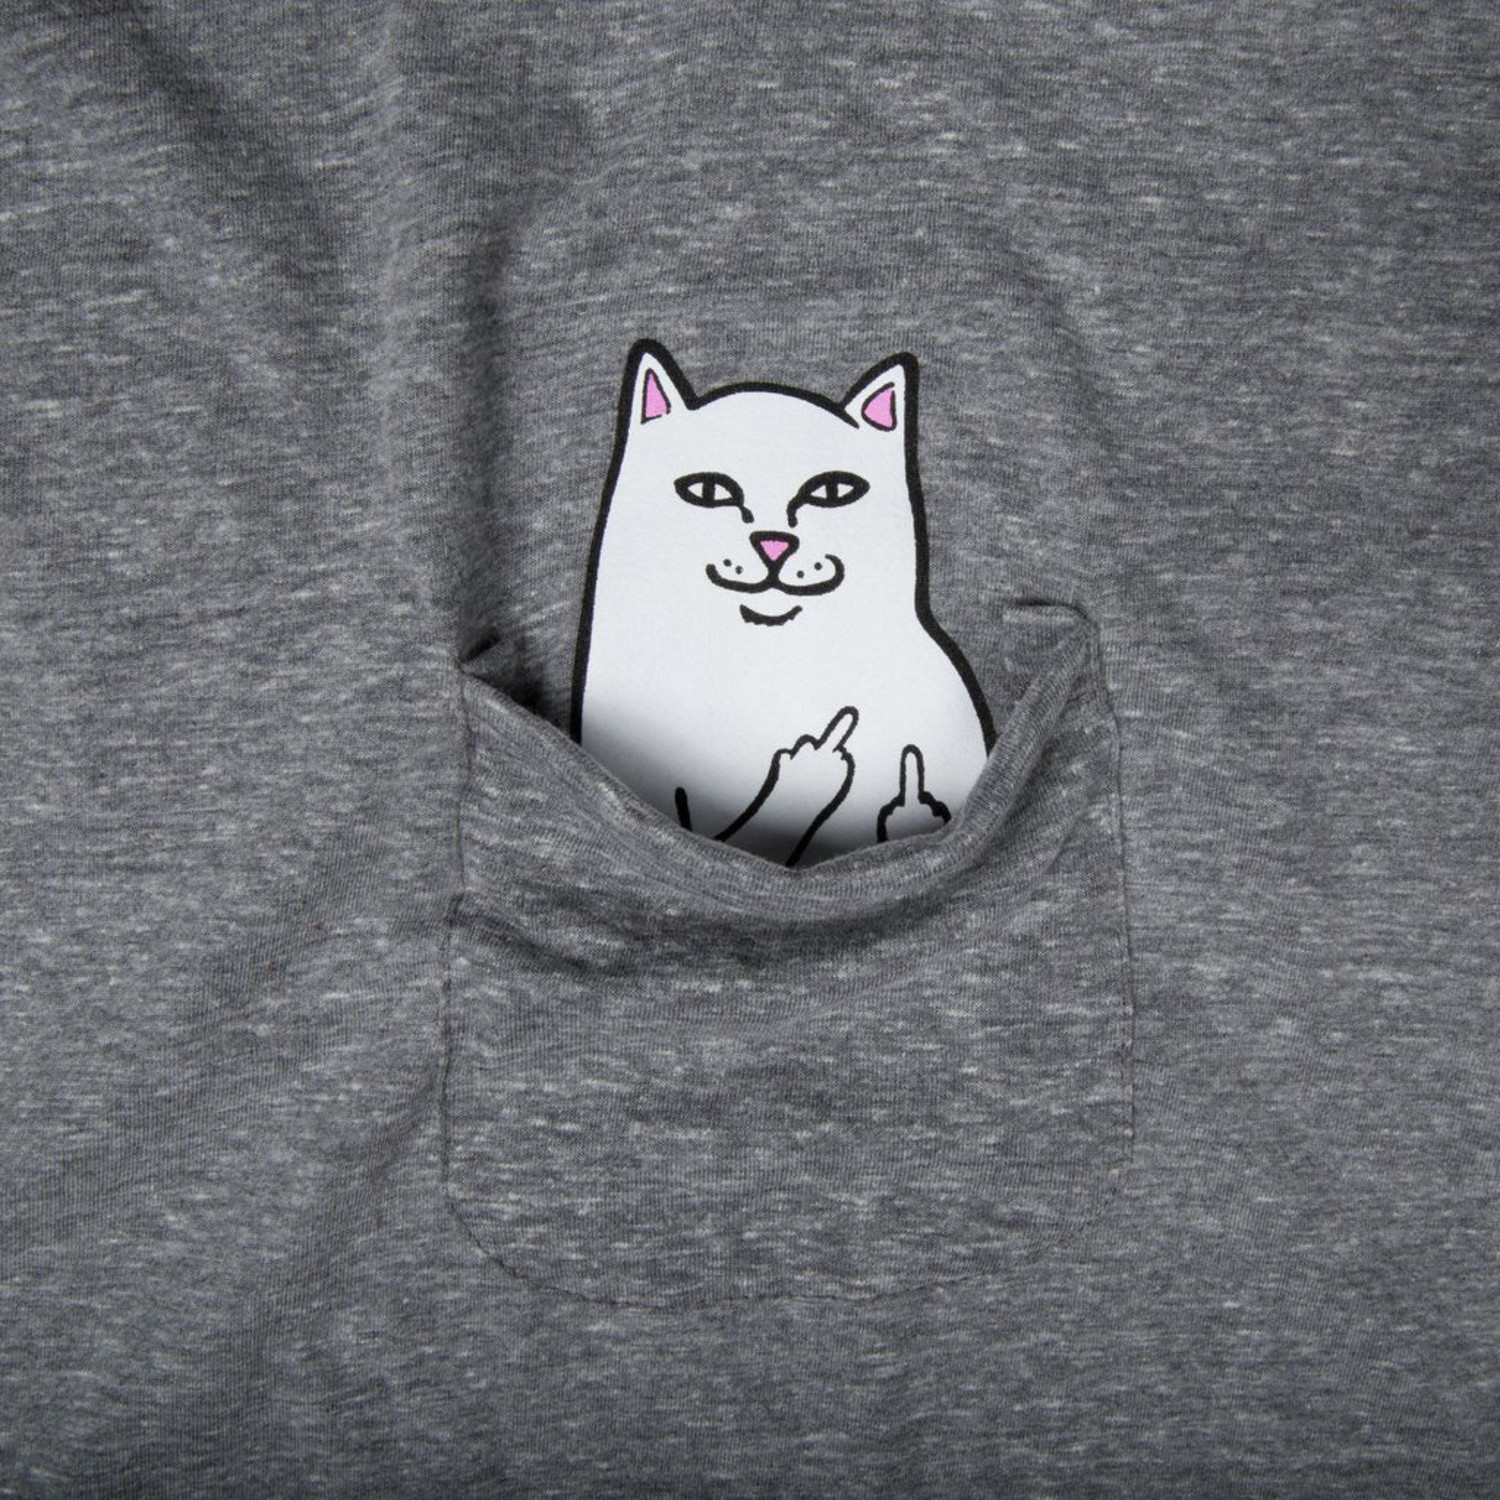 Lord Nermal Pocket Tee  Athletic Grey - The Choice Shop